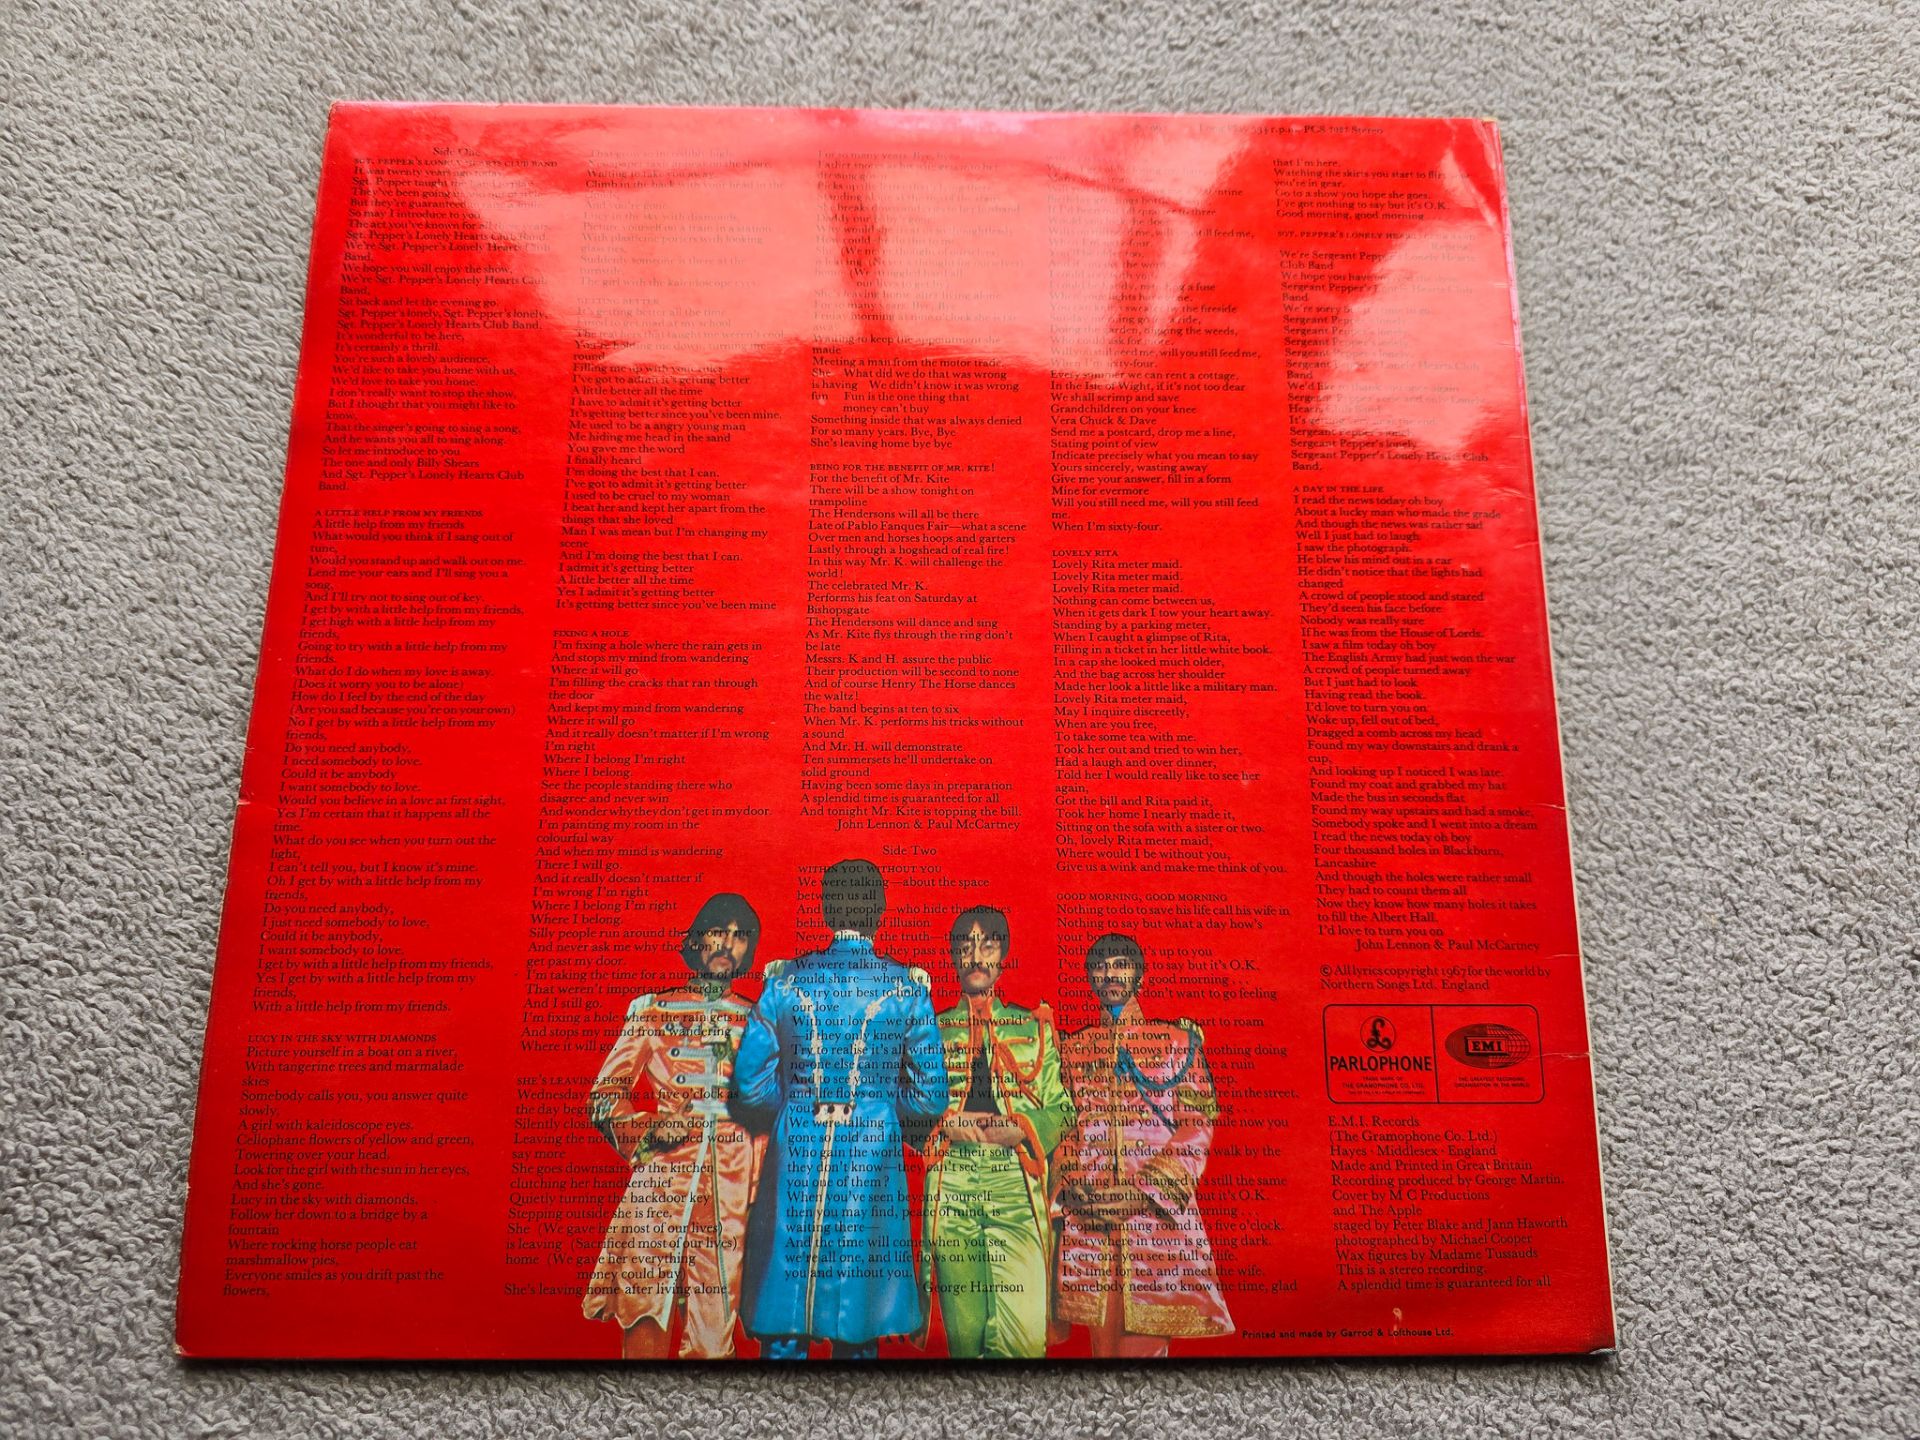 The Beatles – Sgt. Pepper's Lonely Hearts Club Band 1967 Stereo UK Vinyl LP - Image 3 of 9